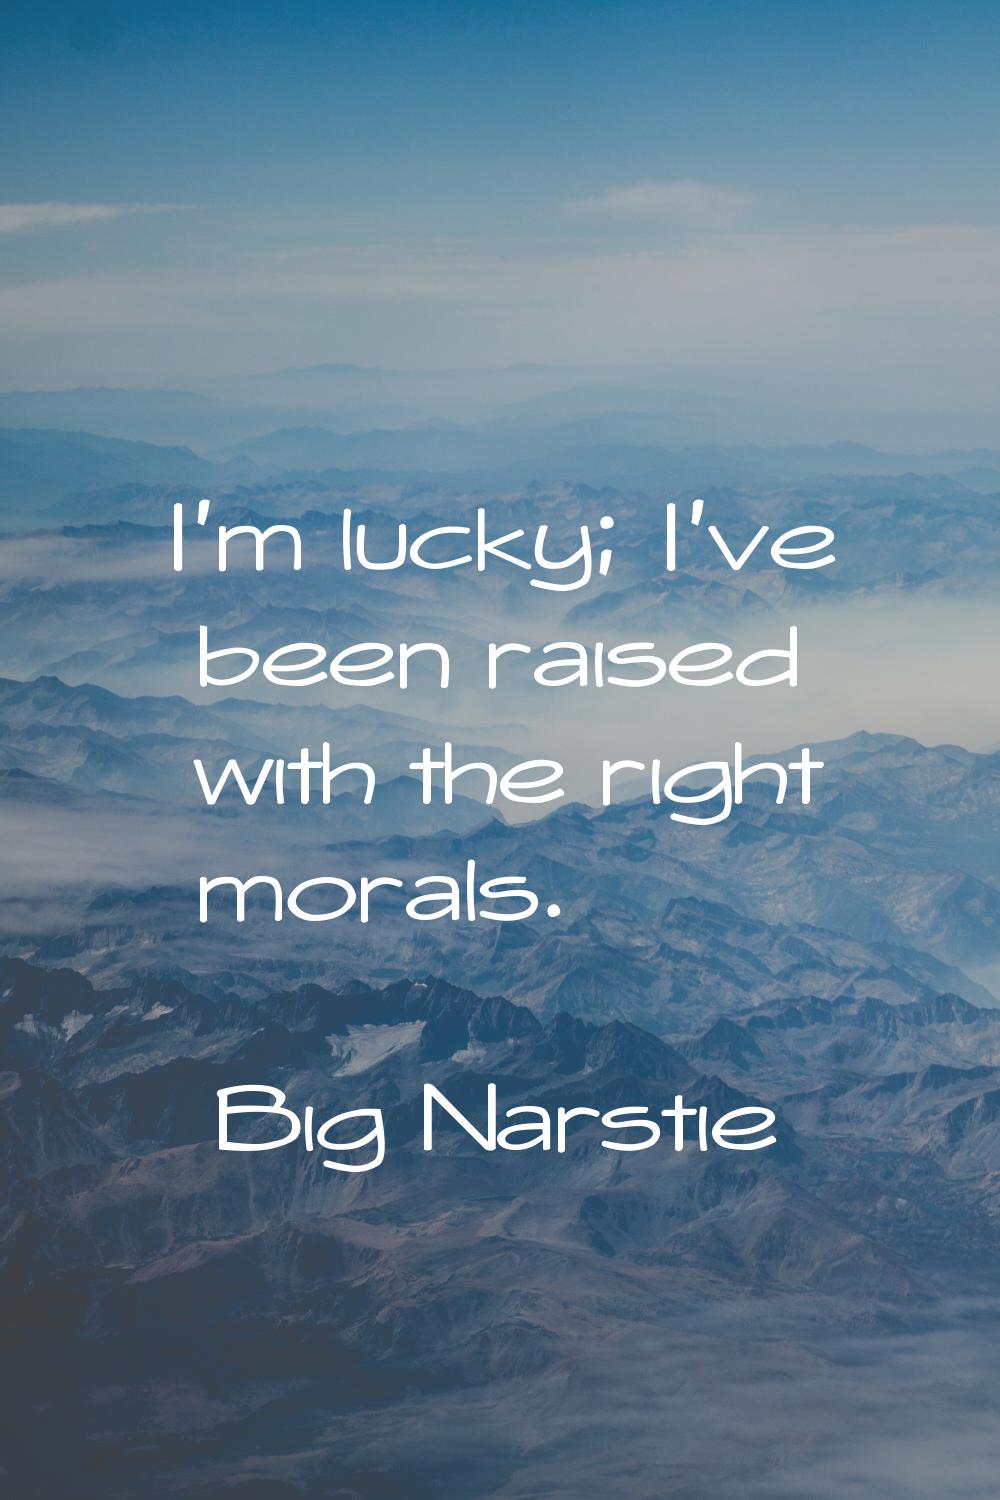 I'm lucky; I've been raised with the right morals.